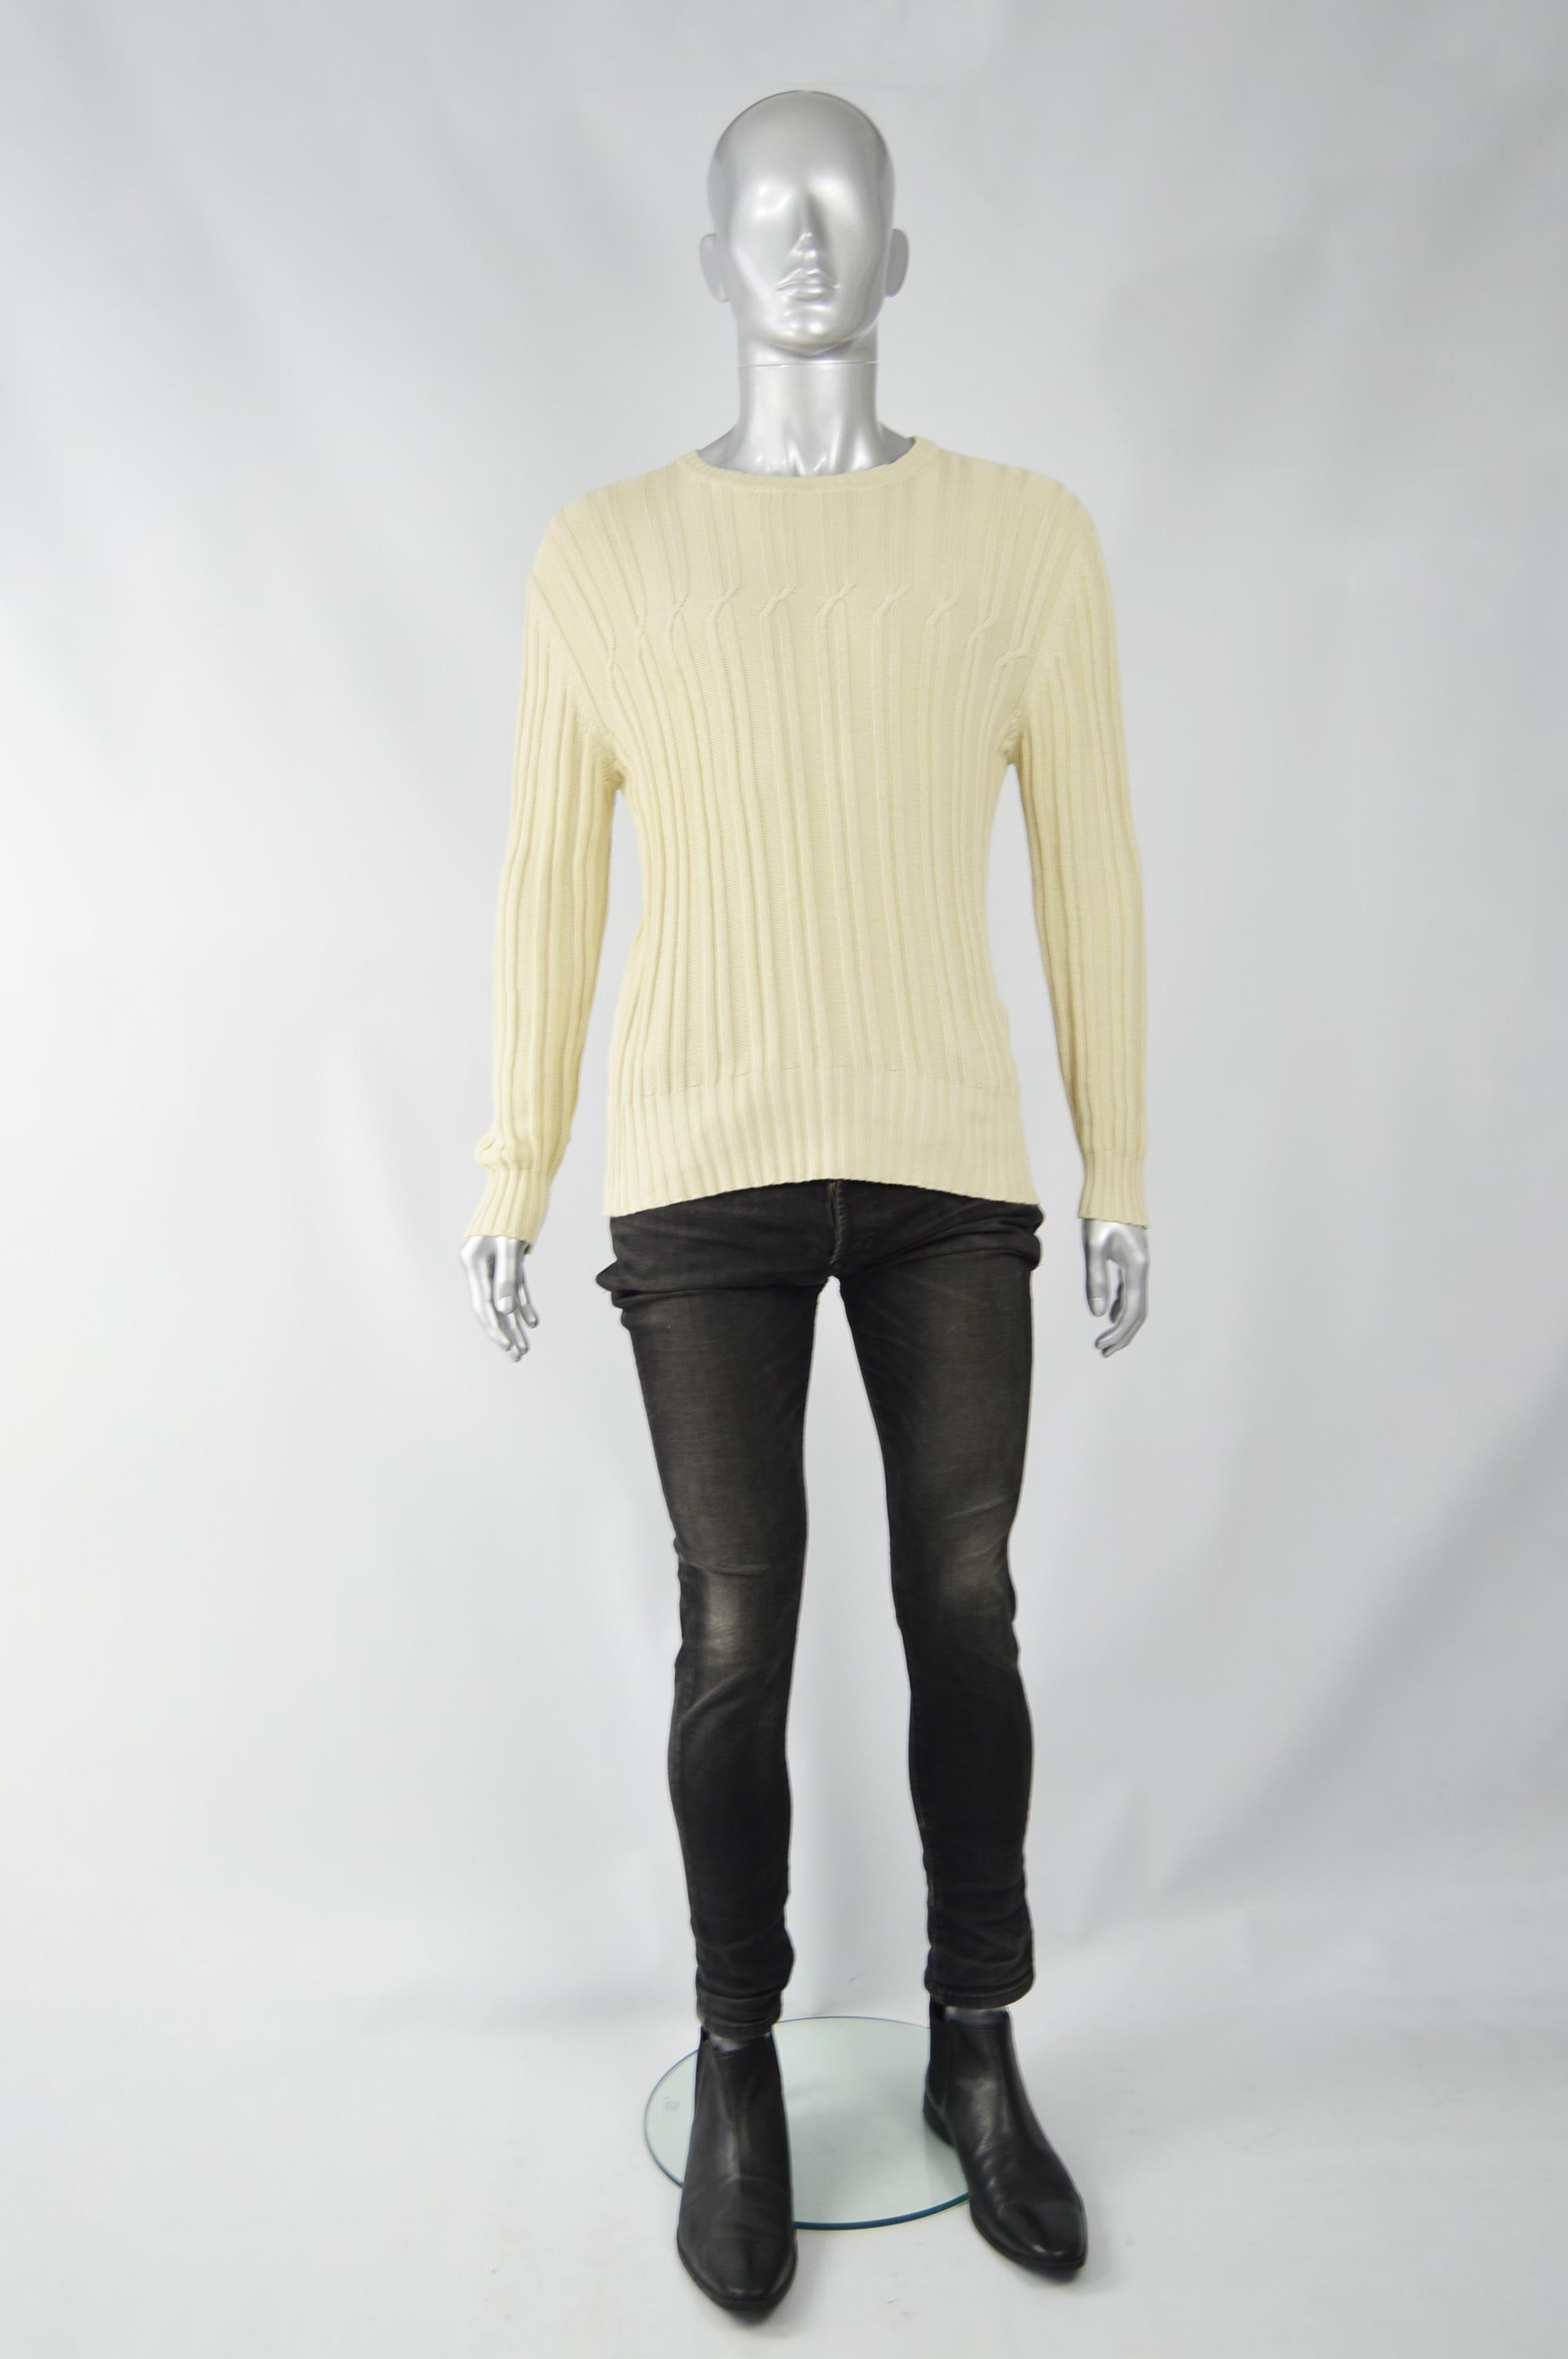 A stylish men's preowned Joseph slim fitting long sleeve sweater in a cream cotton knit with an interesting textured cable knit. 

Size: Marked EU 50 which is roughly a men's Large. Please check measurements. 
Chest - 42” / 106cm
Waist - 34” /